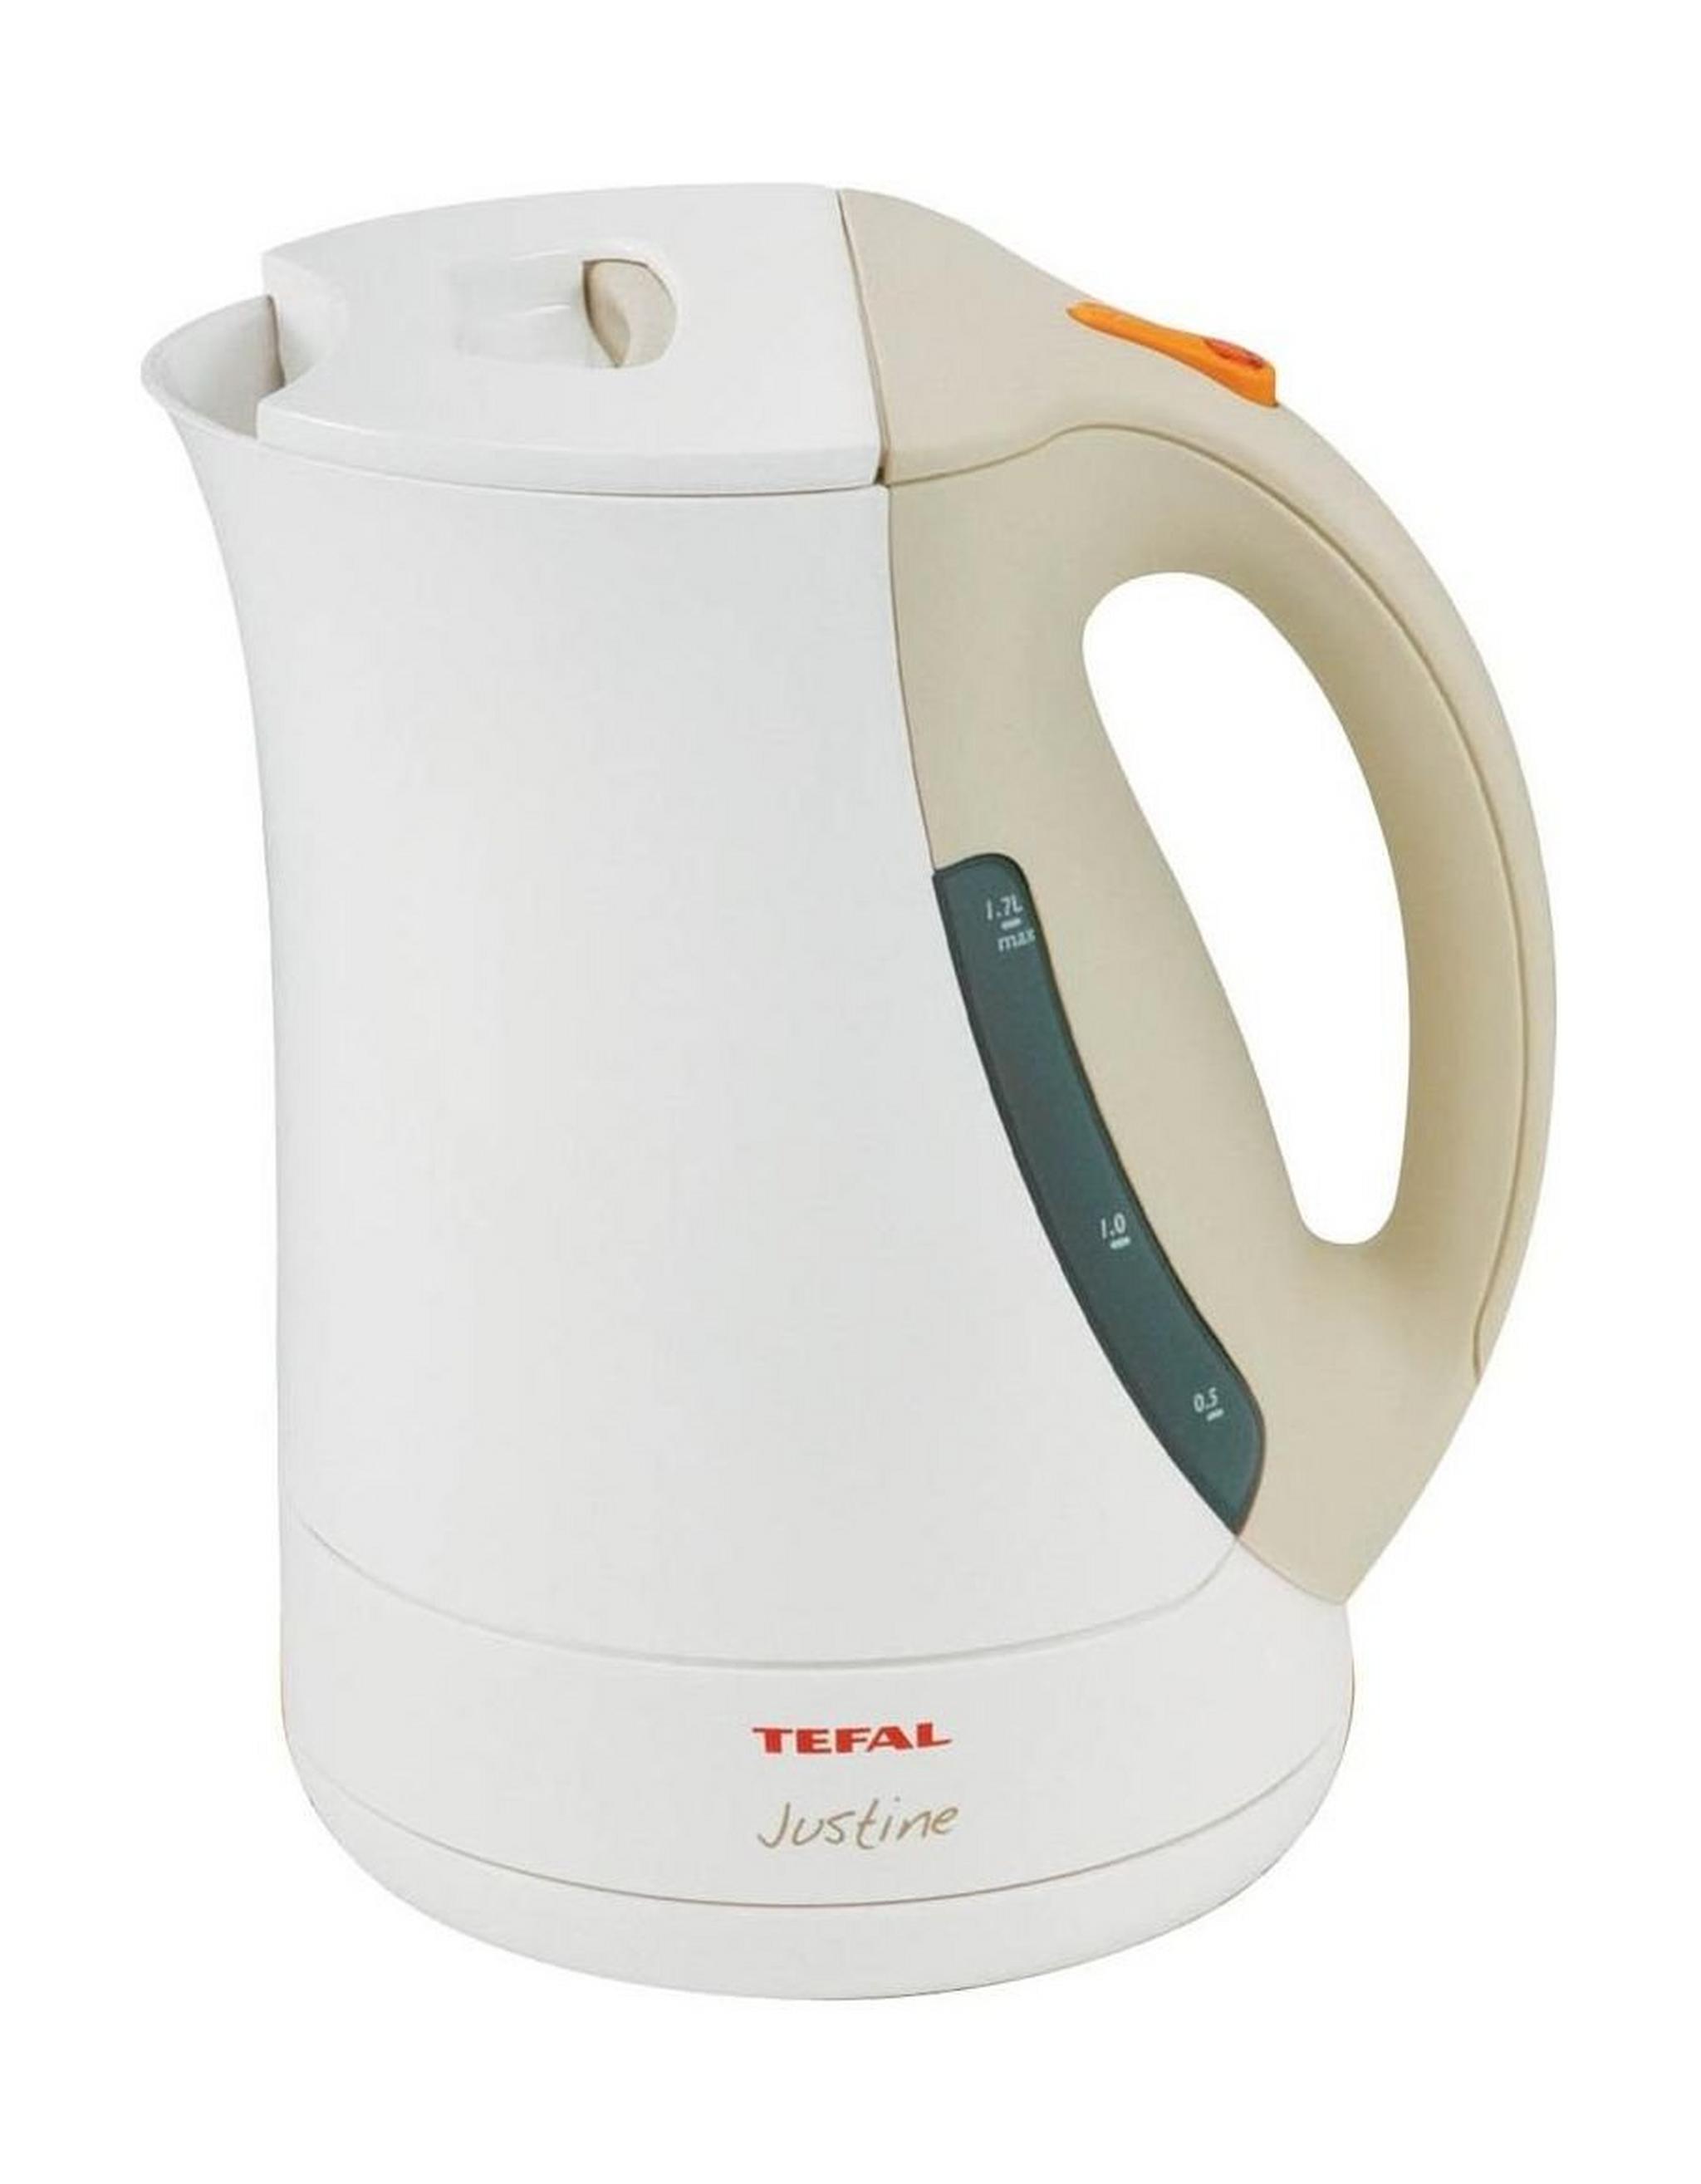 Tefal 1.7 Litres 2200W Kettle (BF563043) - White/Cream